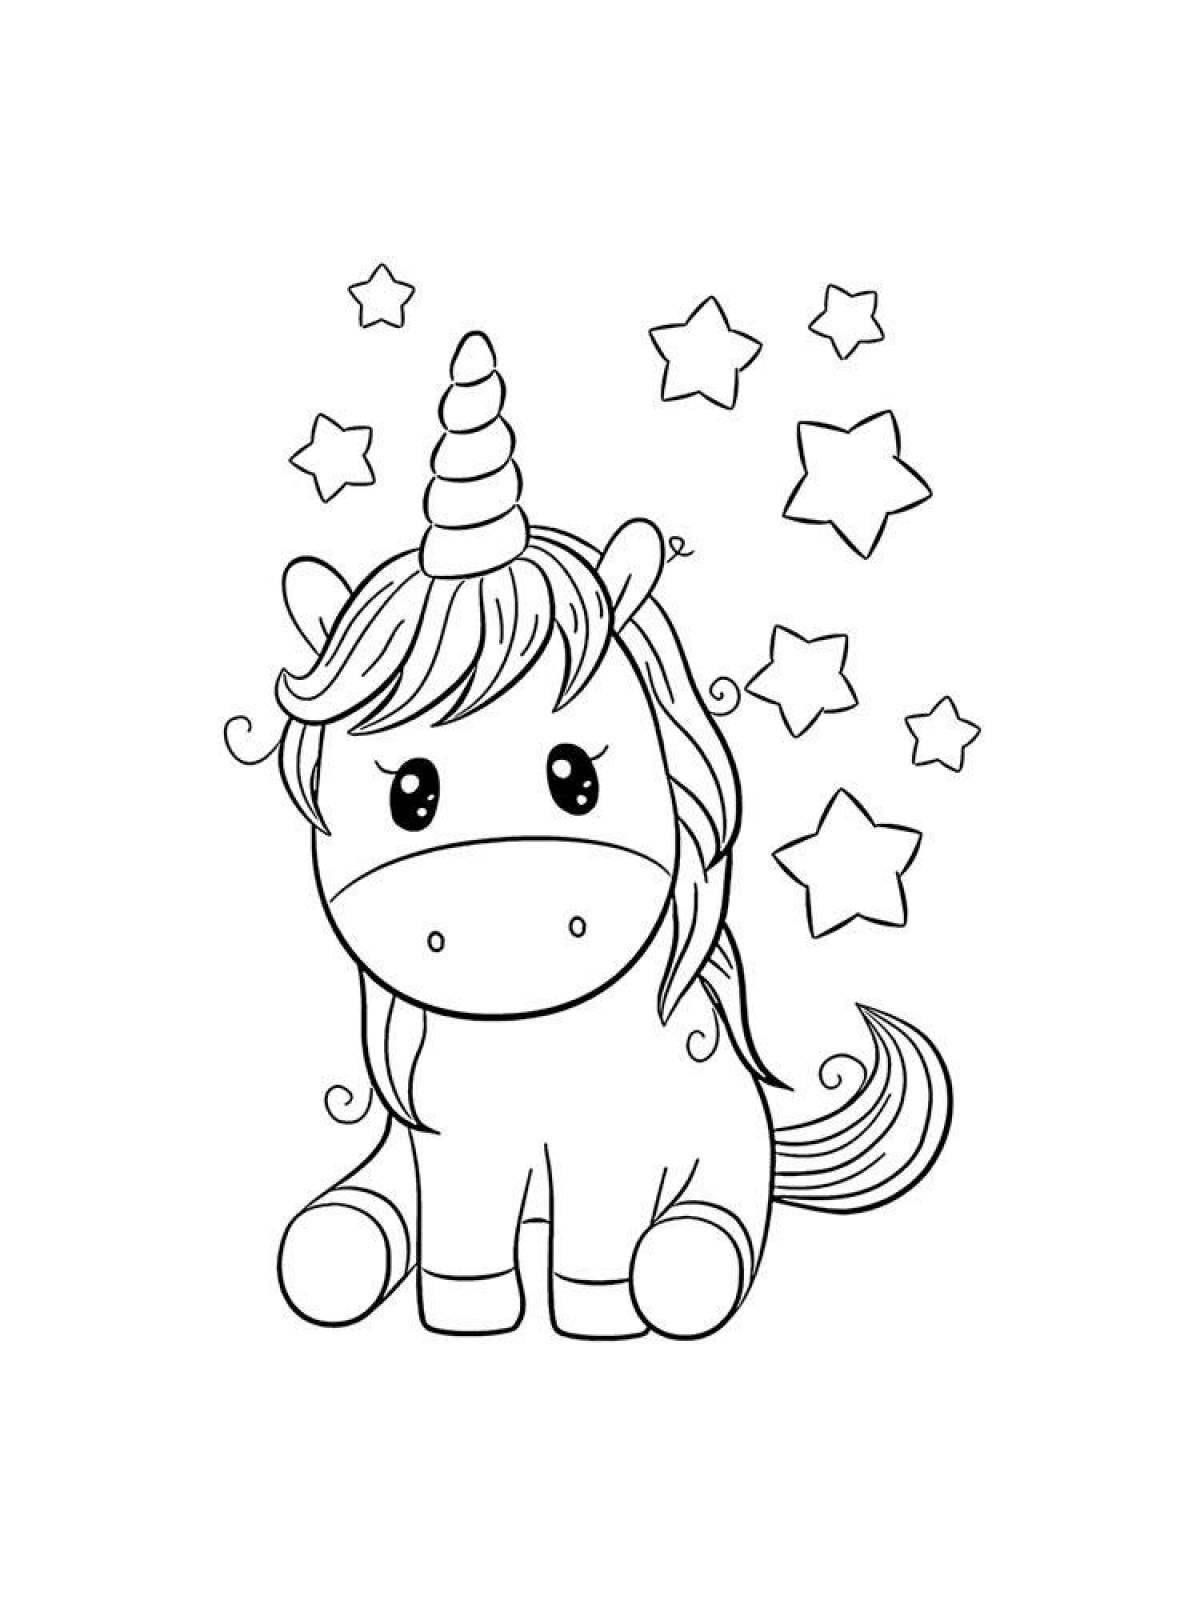 Great unicorn coloring book for girls